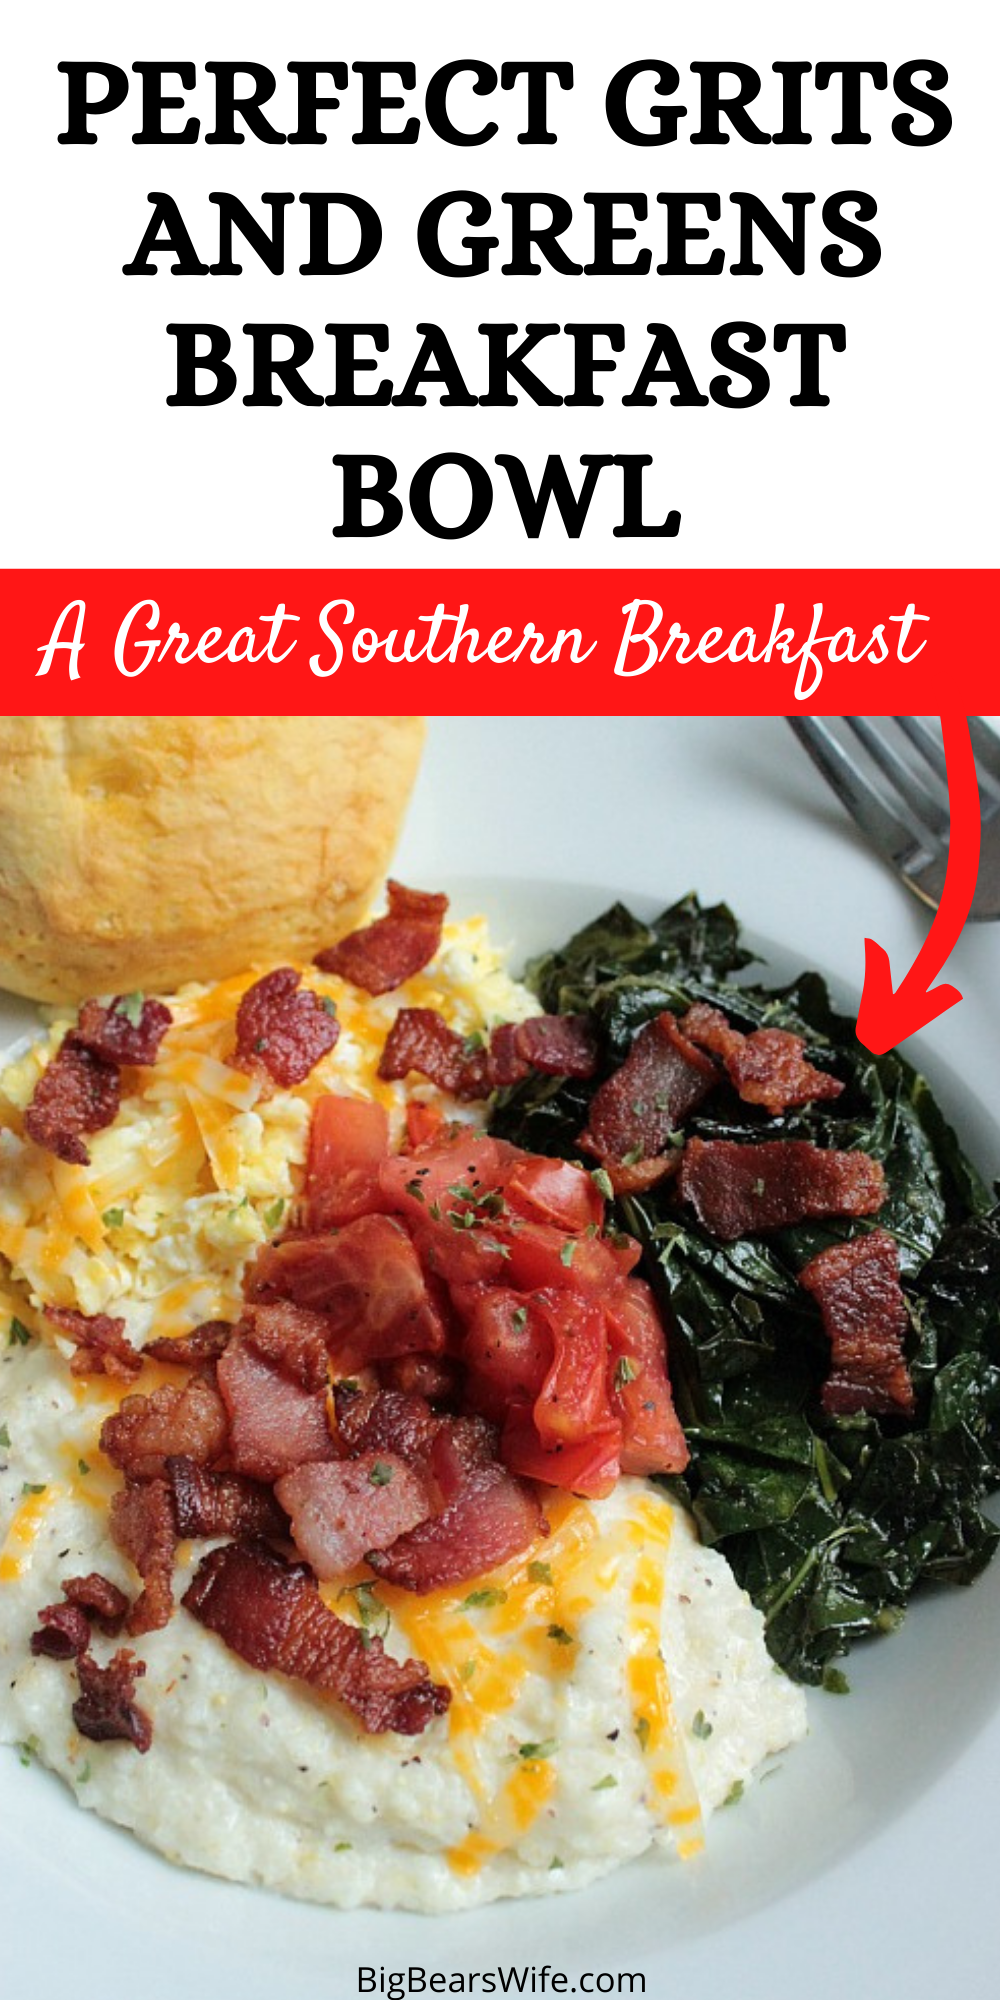 This Perfect Grits and Greens Breakfast Bowl is inspired by a brunch I had at The Corner Kitchen in Ashville, NC years ago! Eggs, Grits, collard greens topped with bacon bits and tomatoes are served with a biscuit for the perfect southern breakfast! via @bigbearswife